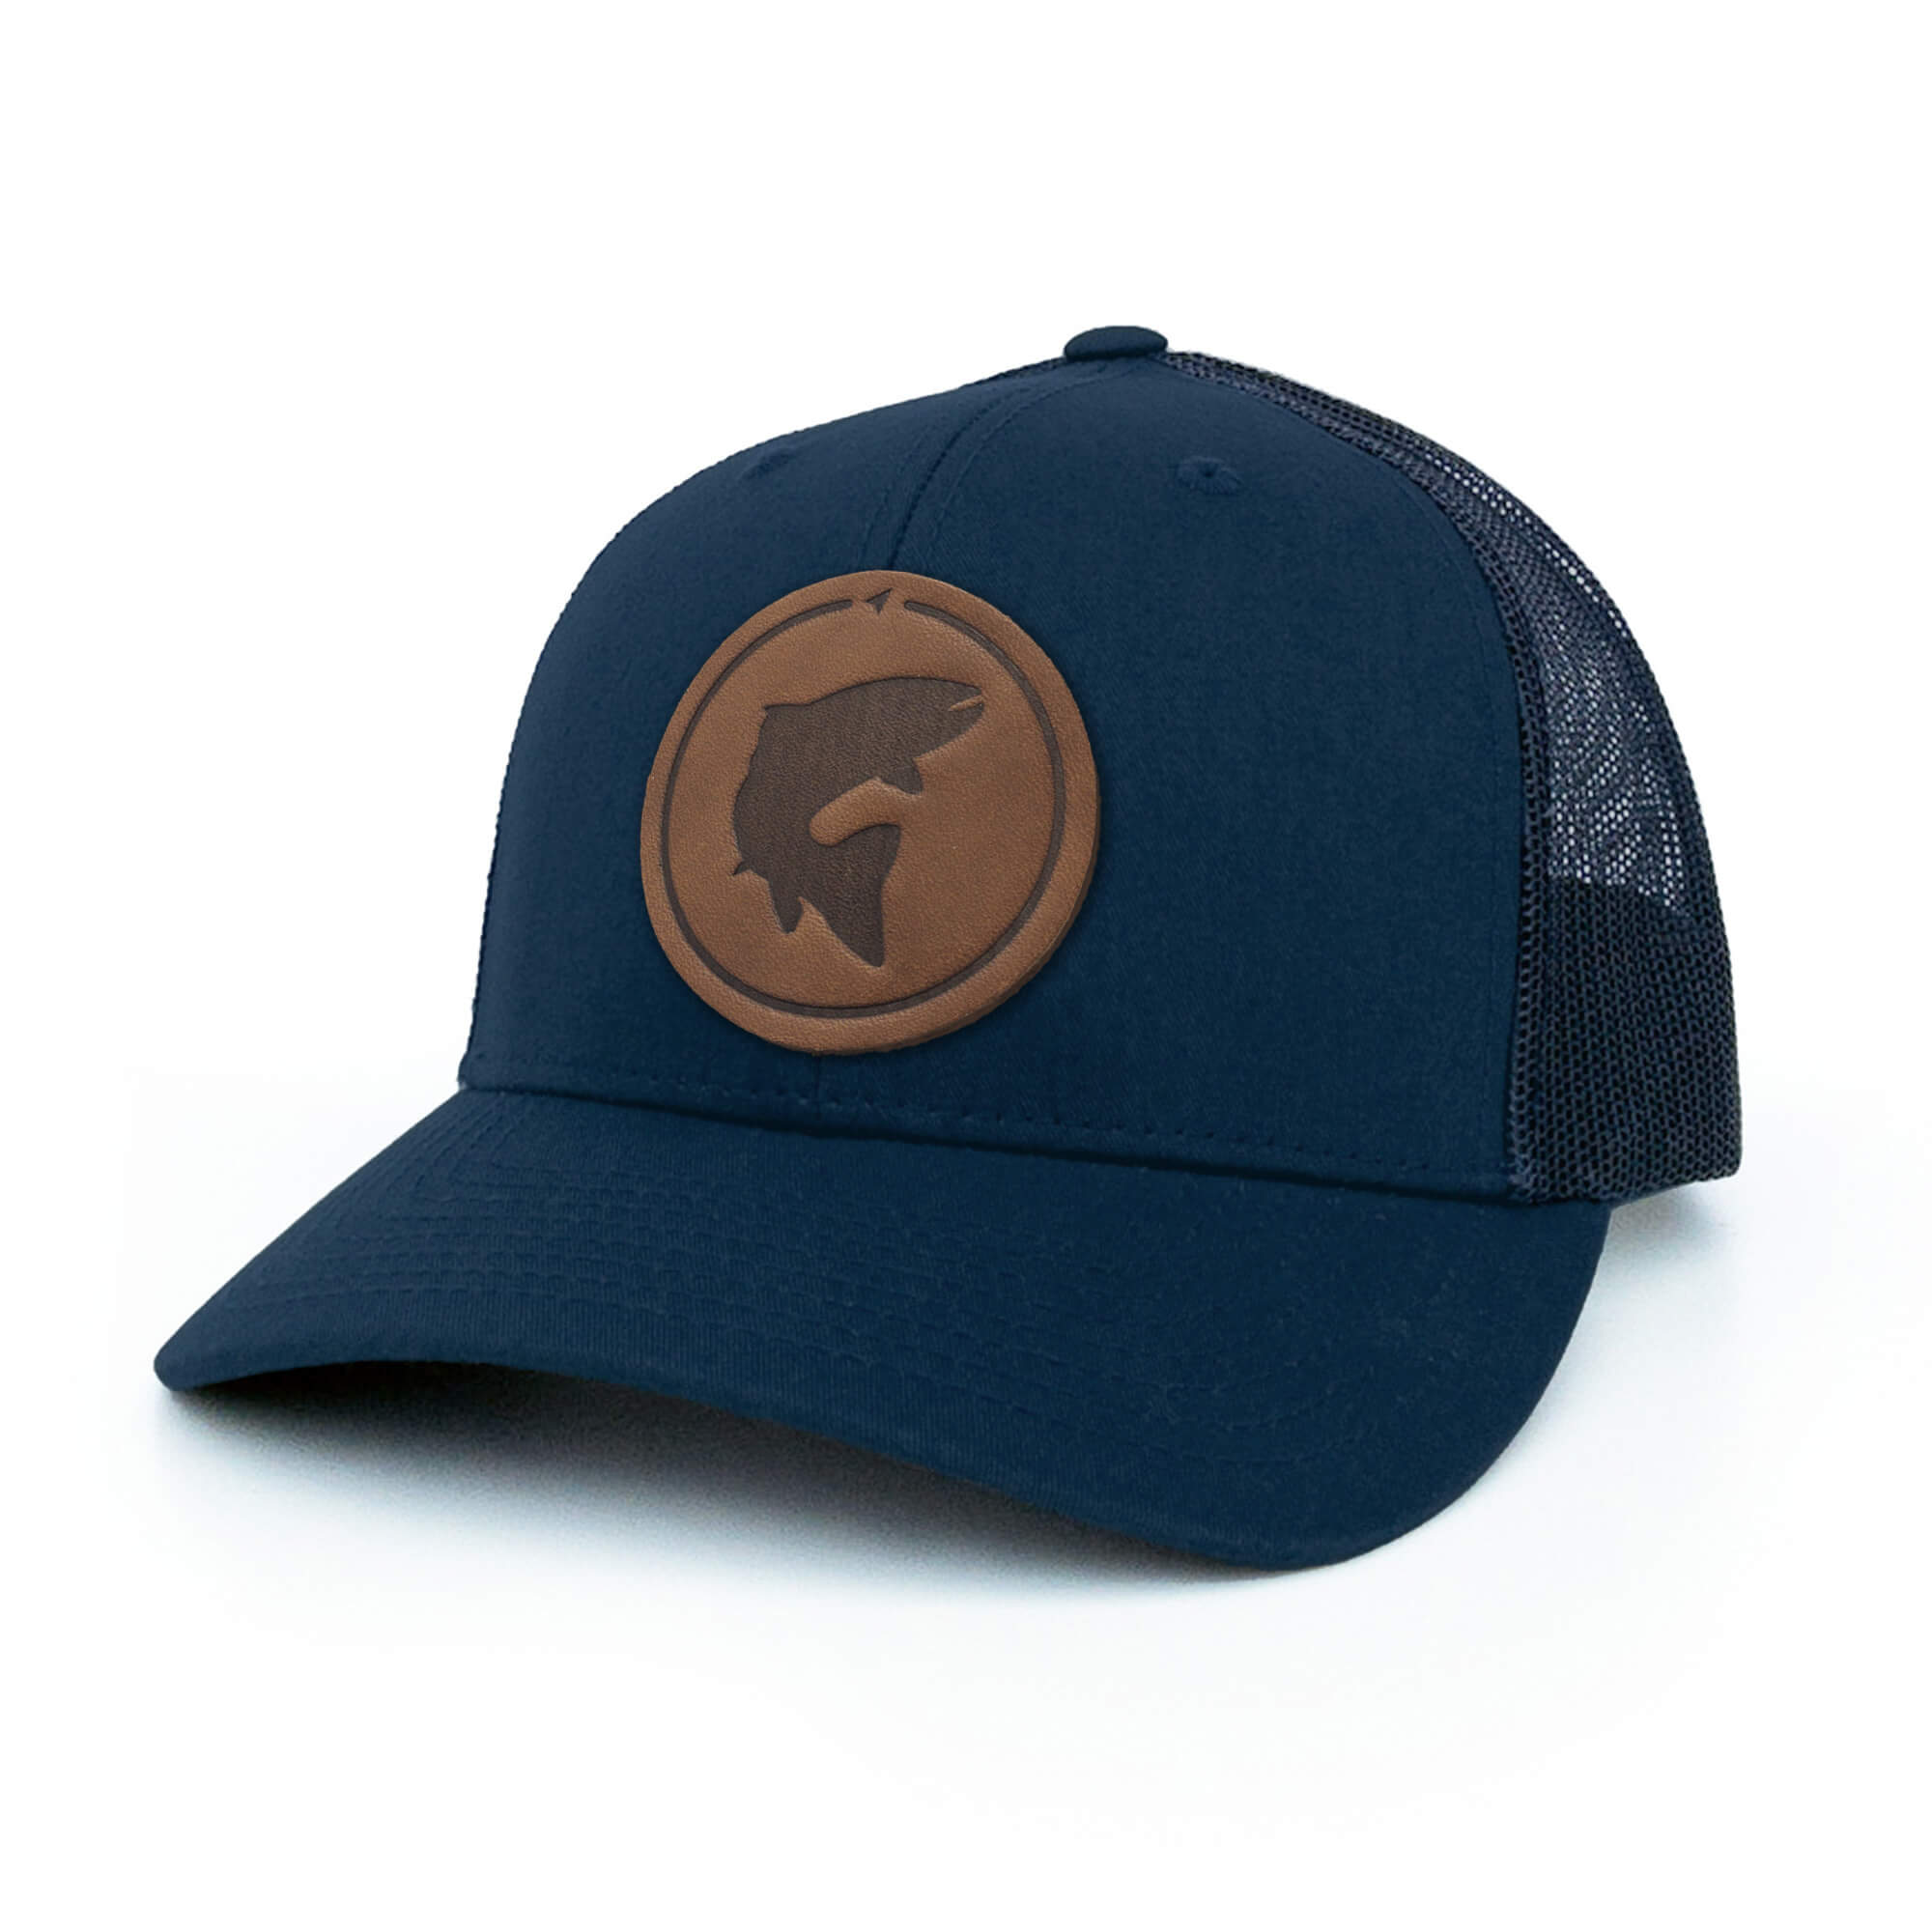 Navy trucker hat with full-grain leather patch of a Trout | BLACK-004-001, CHARC-004-001, NAVY-004-001, HGREY-004-001, MOSS-004-001, BROWN-004-001